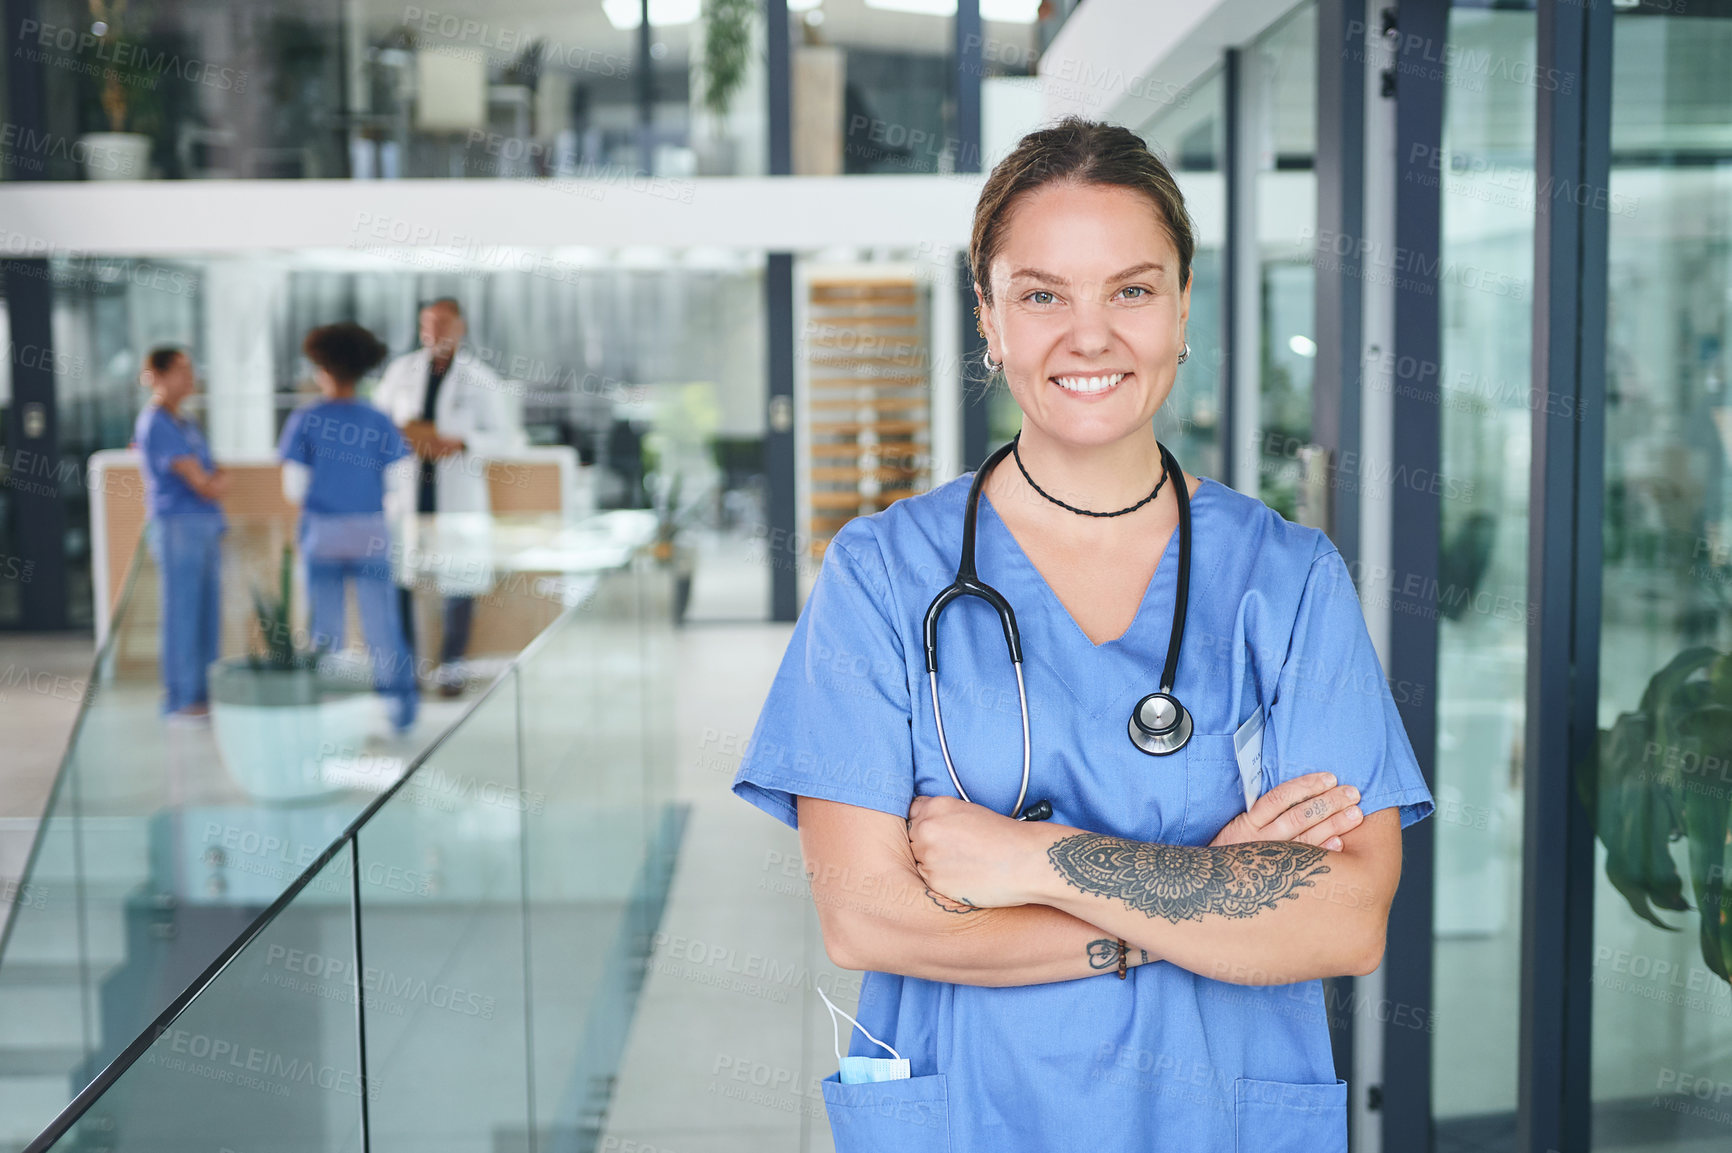 Buy stock photo Cropped portrait of an attractive young nurse standing in the clinic during the day with her arms folded